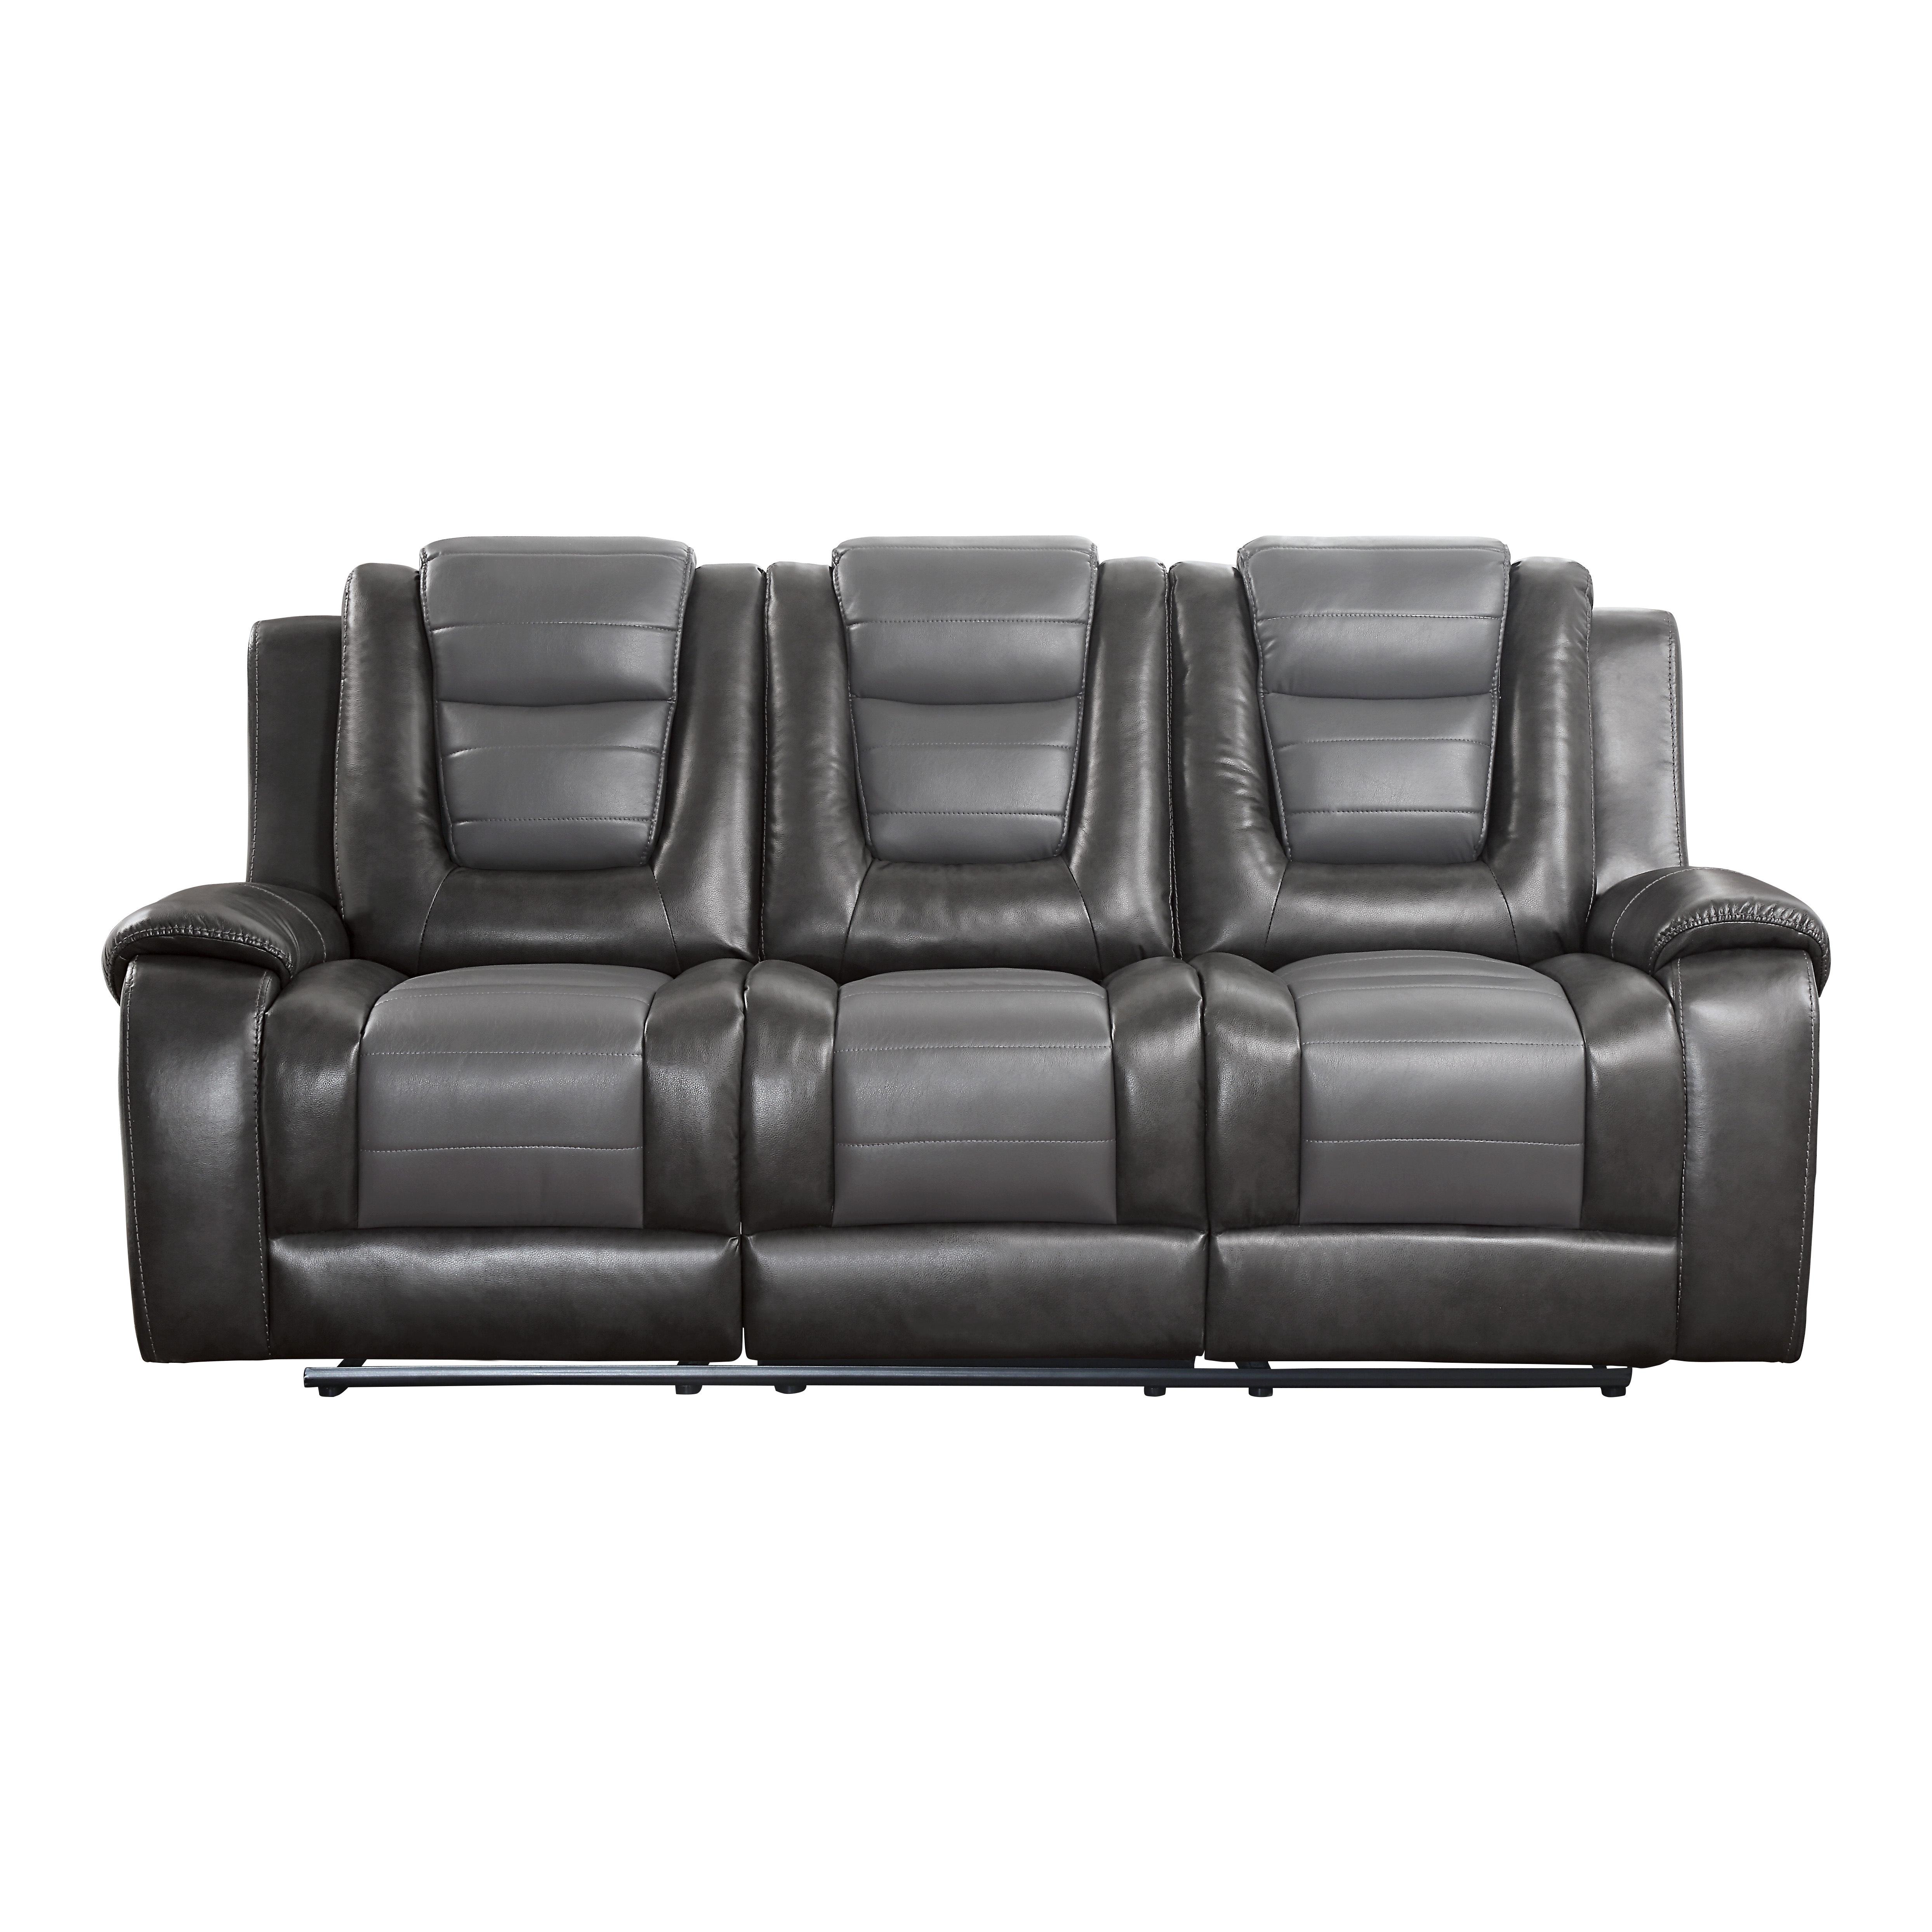 Transitional Reclining Sofa 9470GY-3 Briscoe 9470GY-3 in Light Gray, Dark Gray Faux Leather